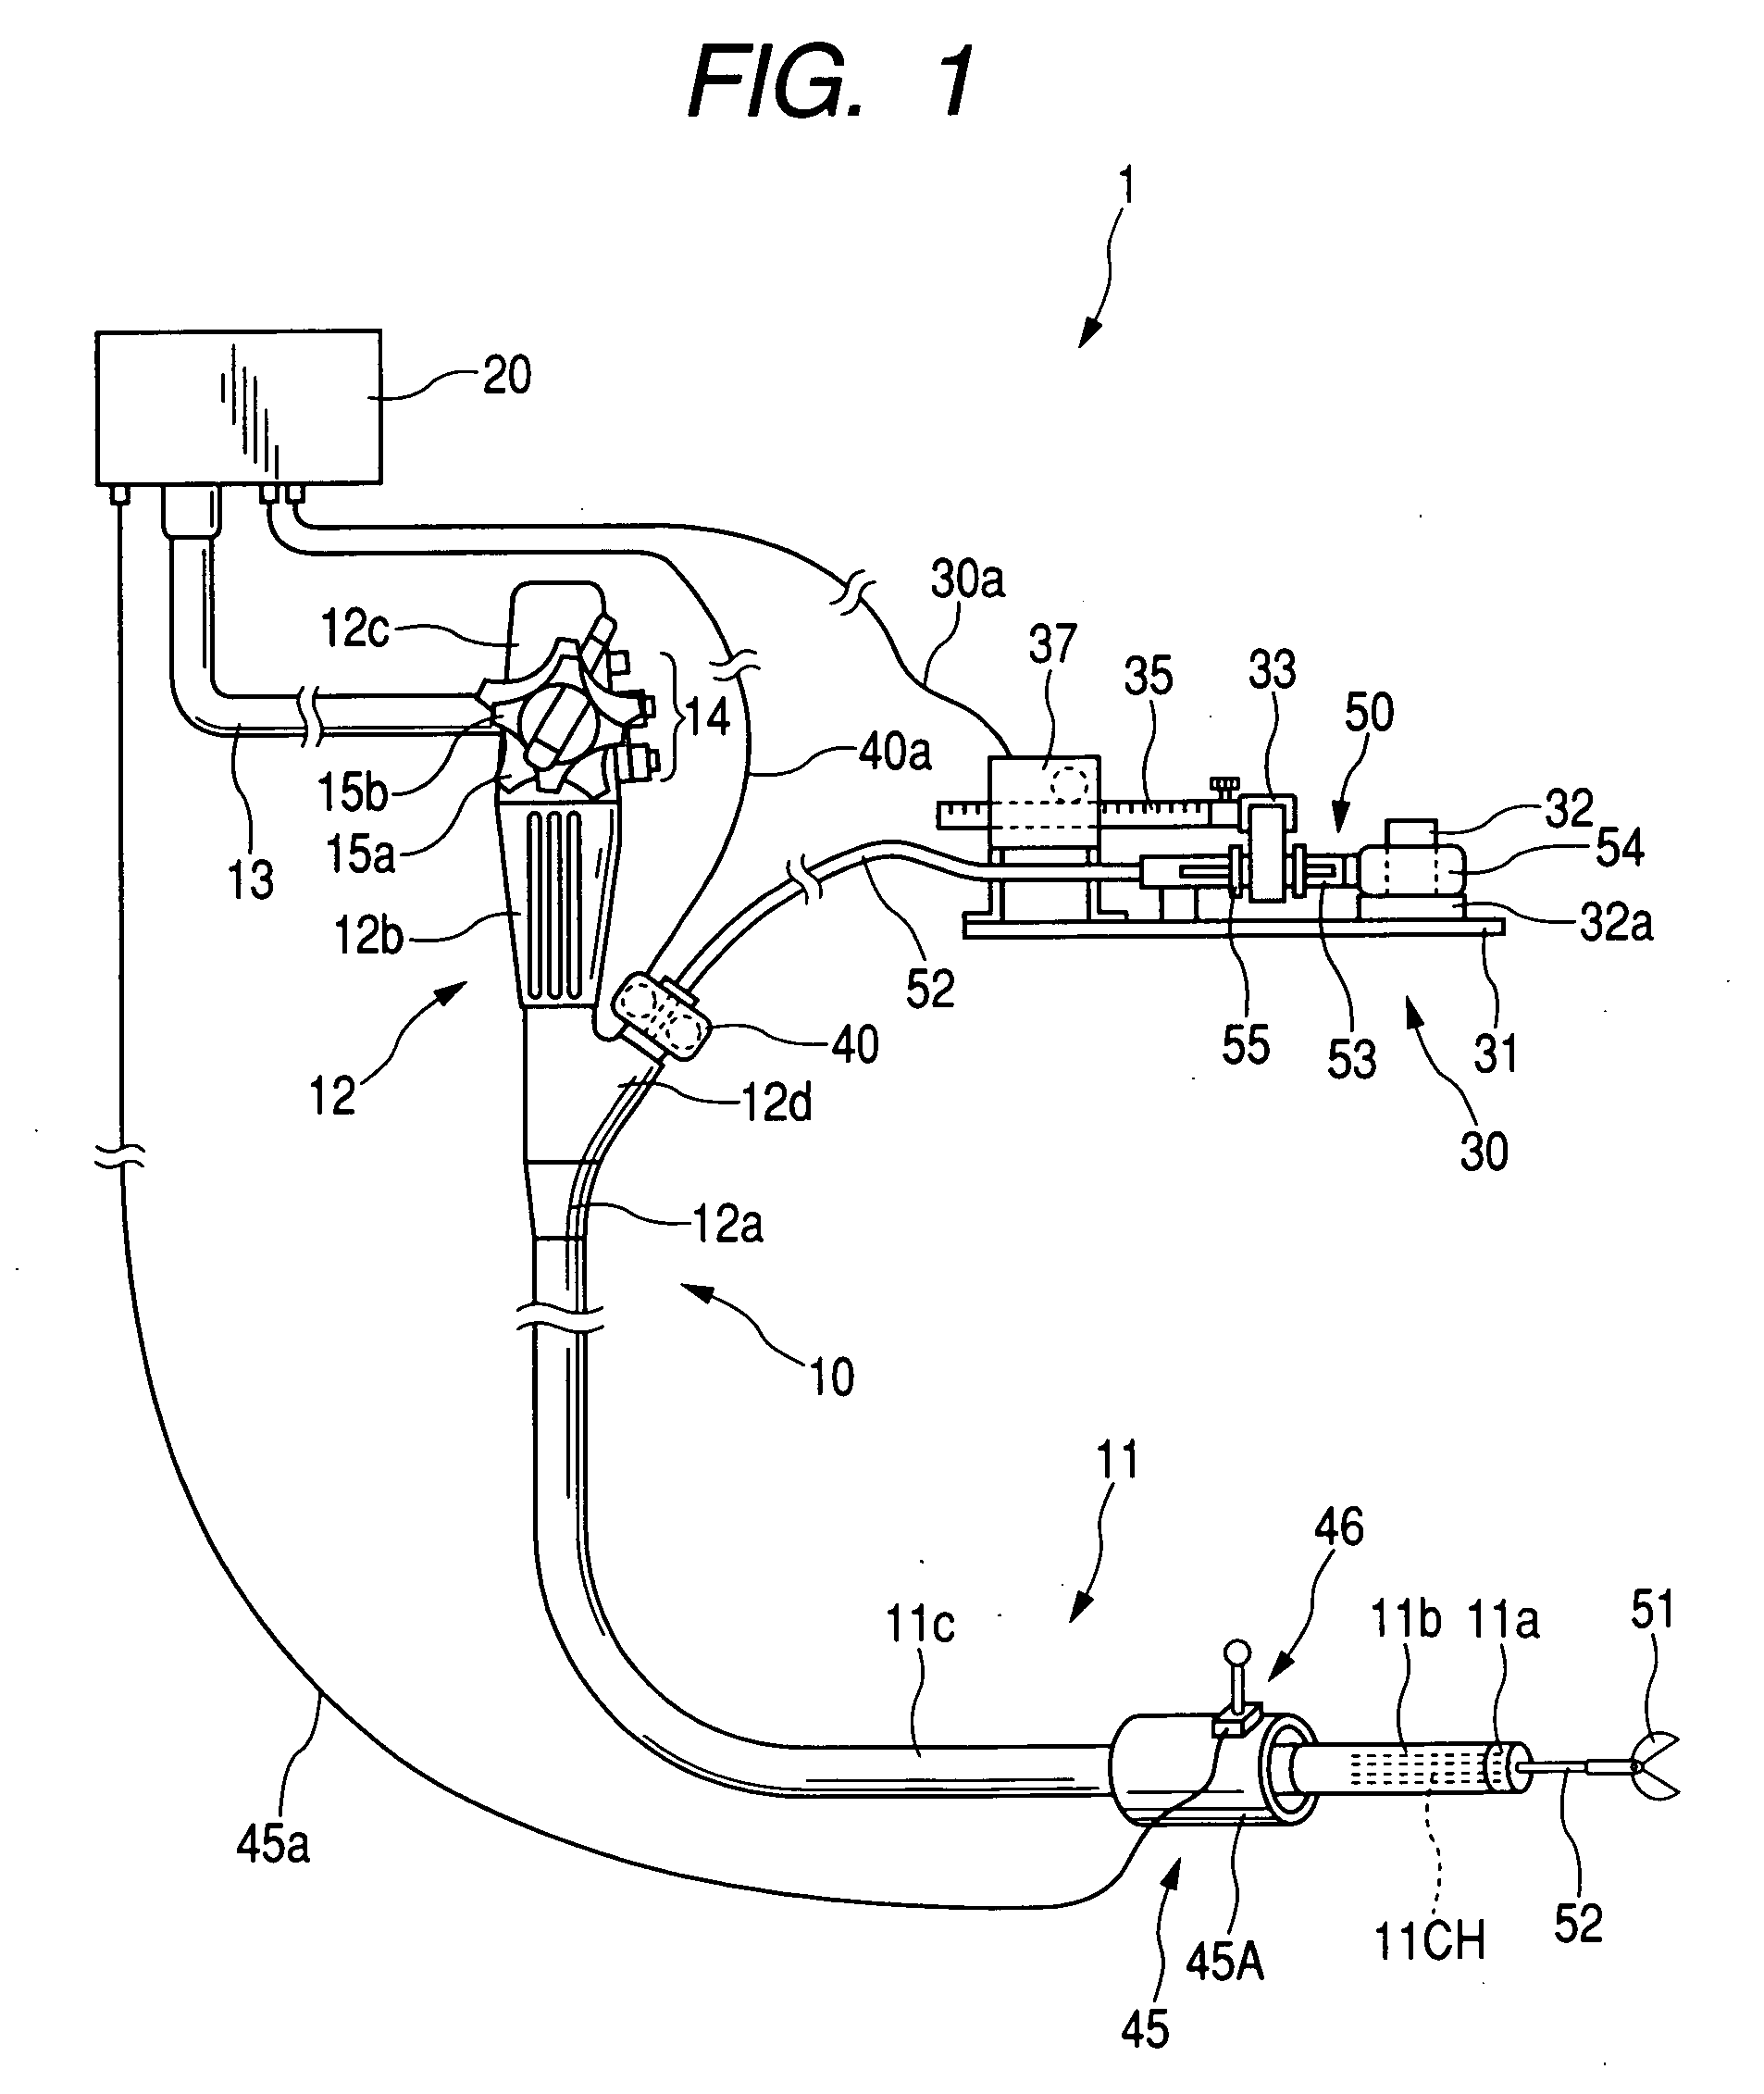 Endoscope system equipped with manipulating unit for commanding medical therapy to endoscope and medical instrument attached thereto